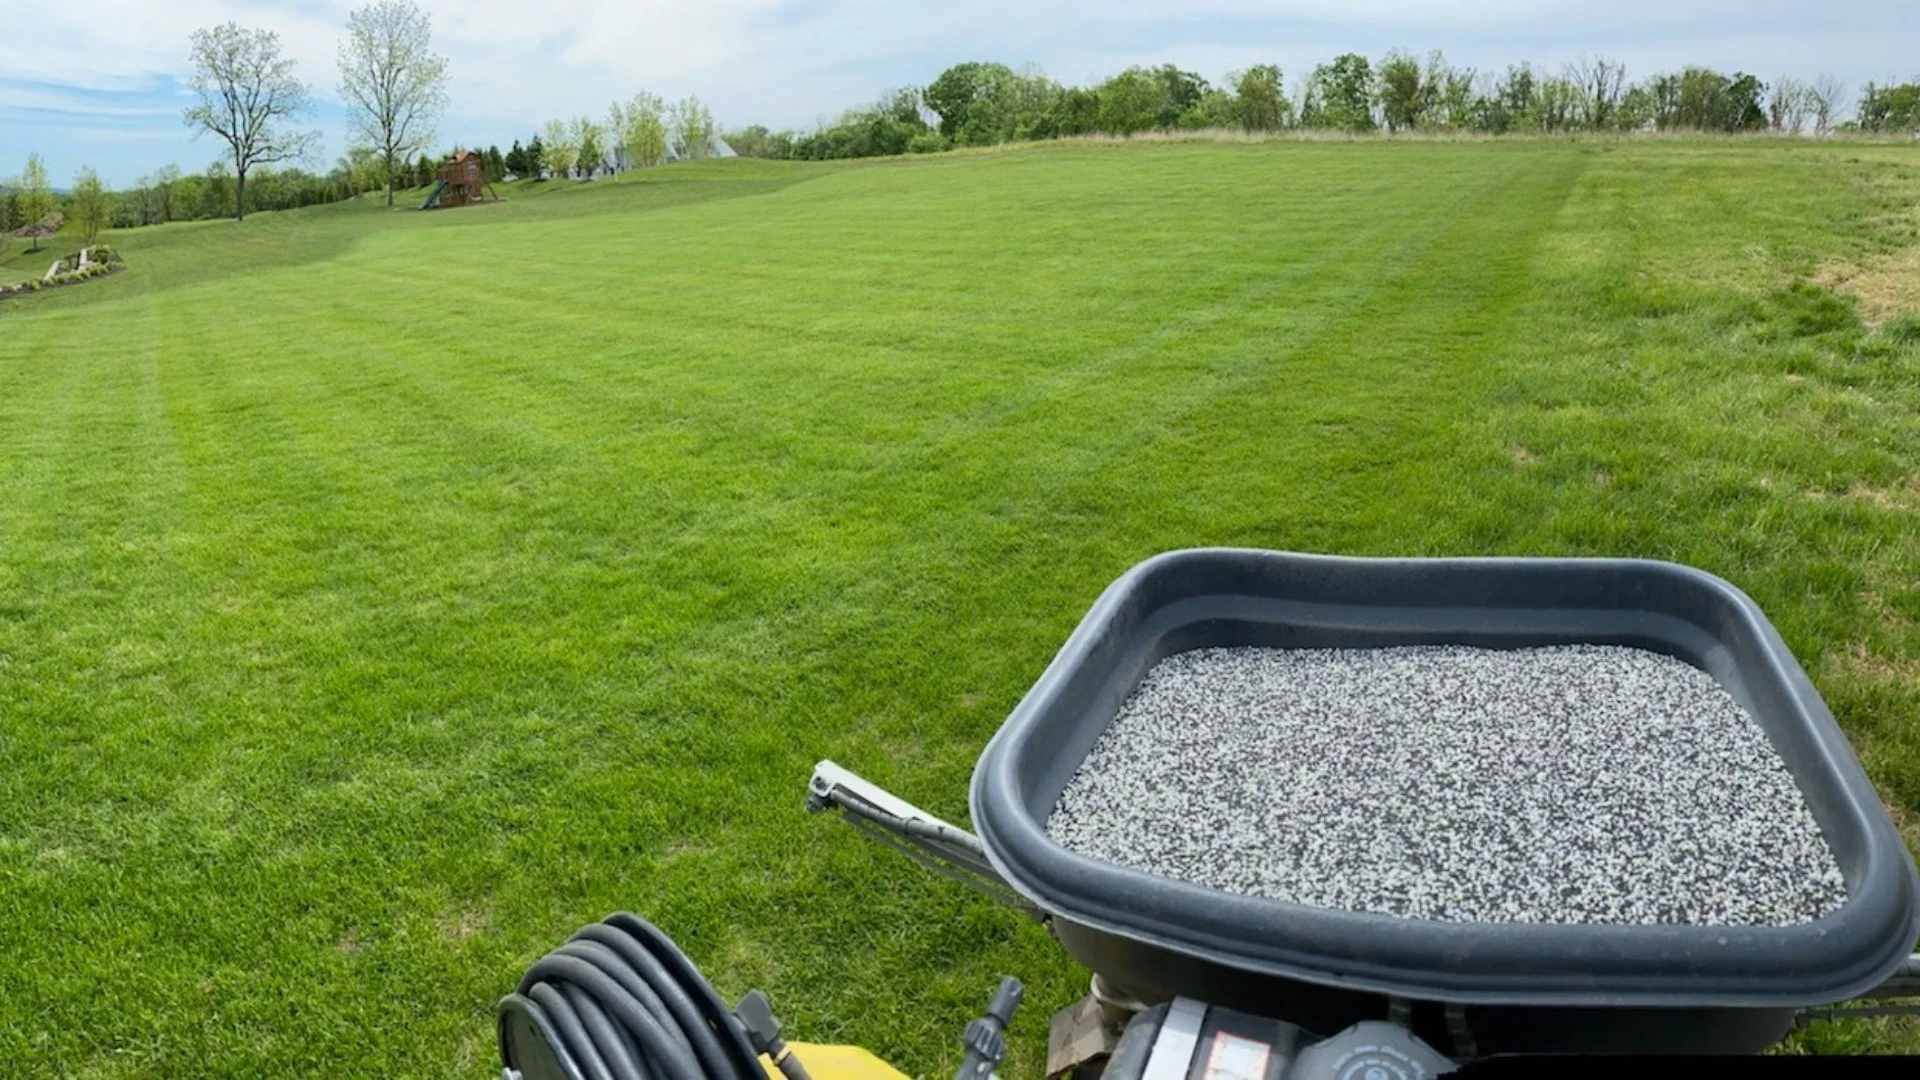 How Many Times Should I Fertilize My Lawn in Pennsylvania in the Spring?